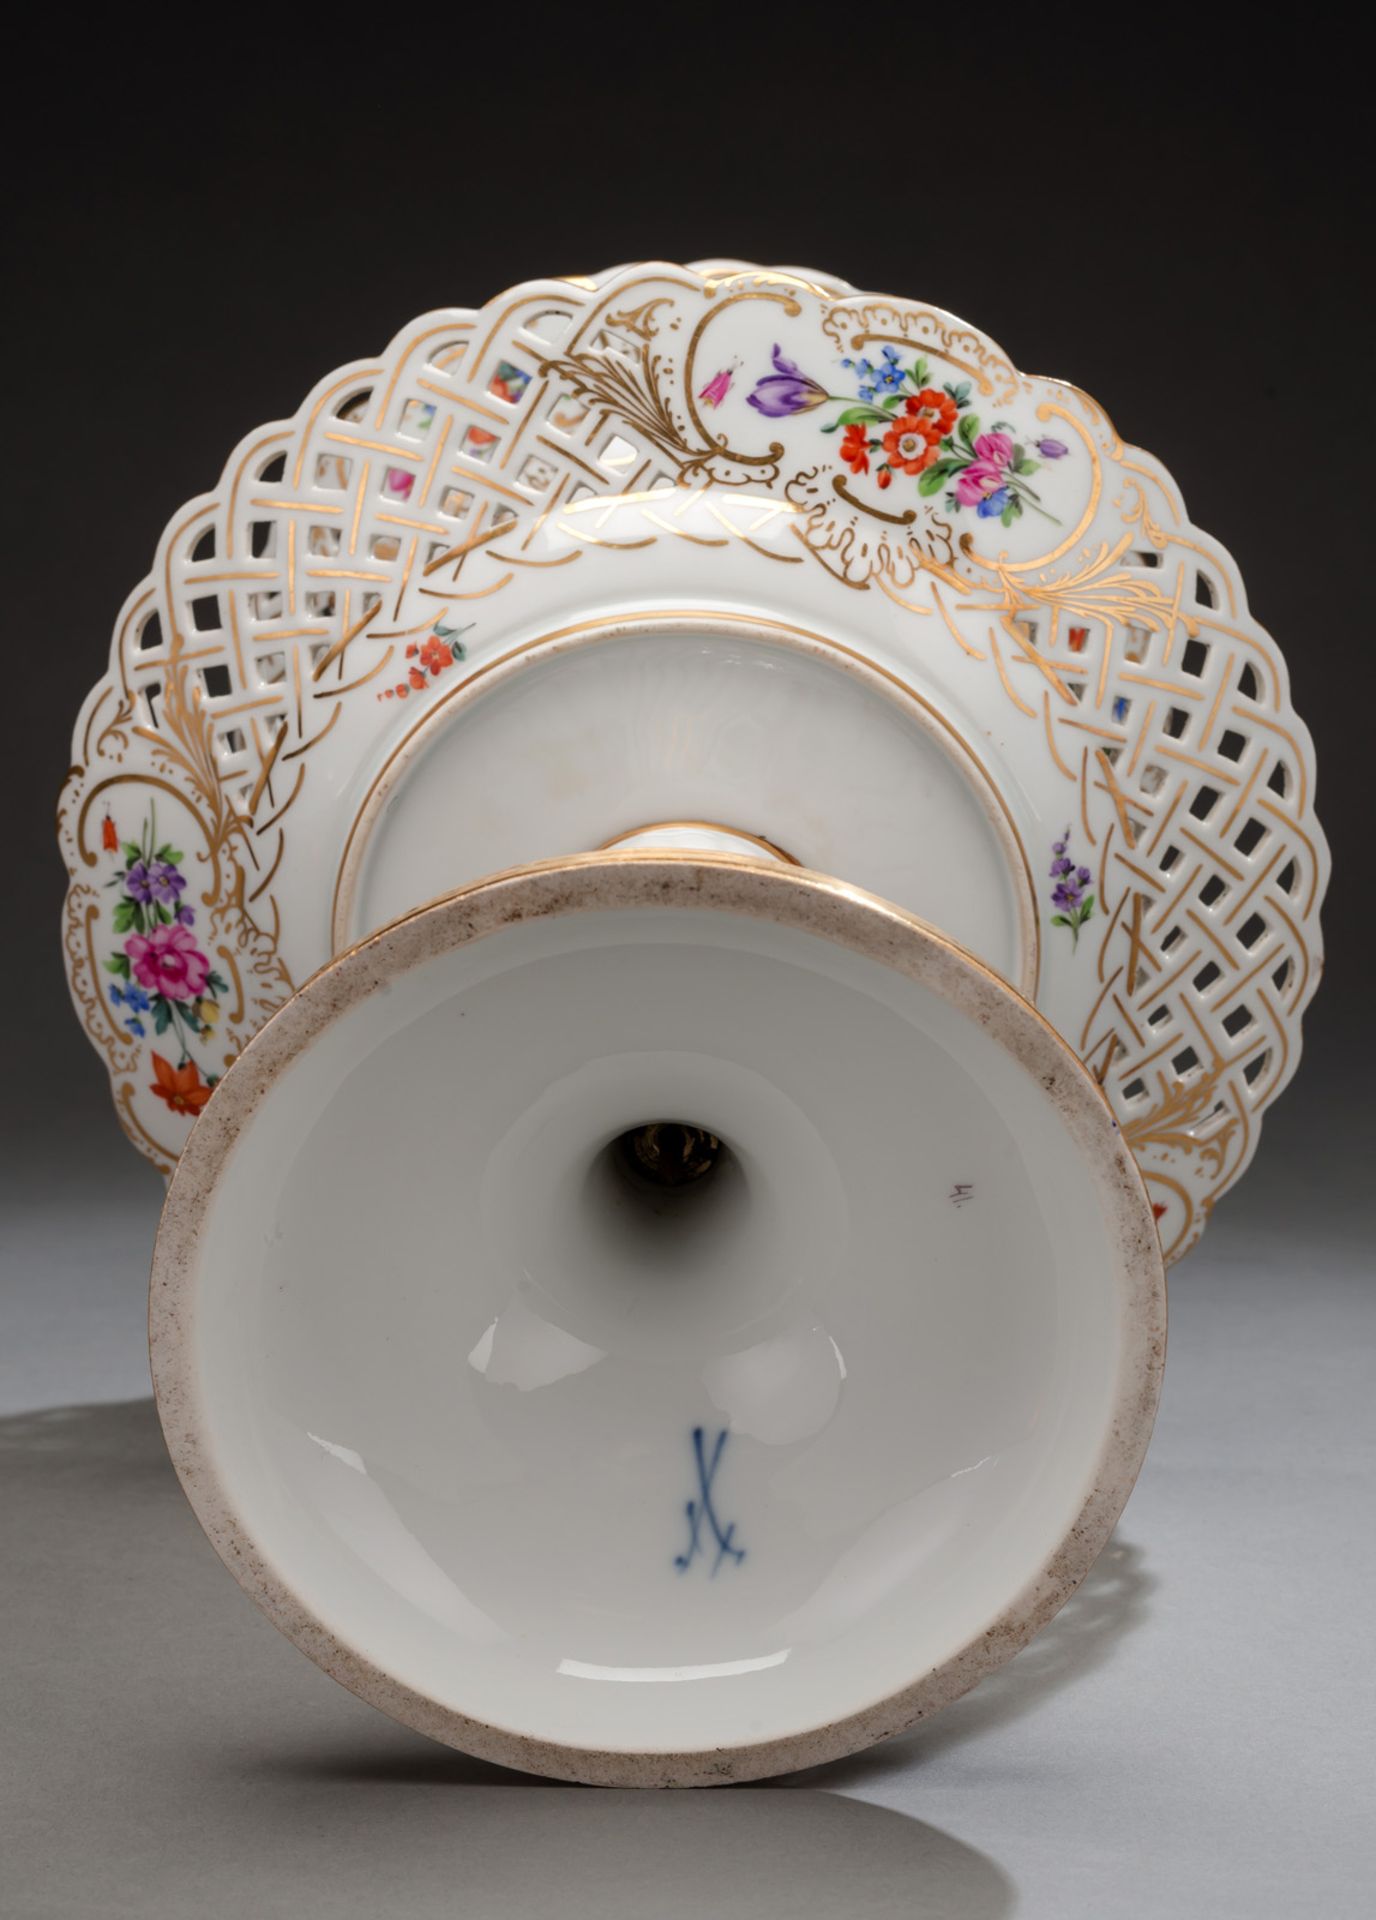 A MEISSEN FLORAL AND INSECT TOOLED CENTRE PIECE WITH A PRINCELY COAT OF ARMS - Image 4 of 5